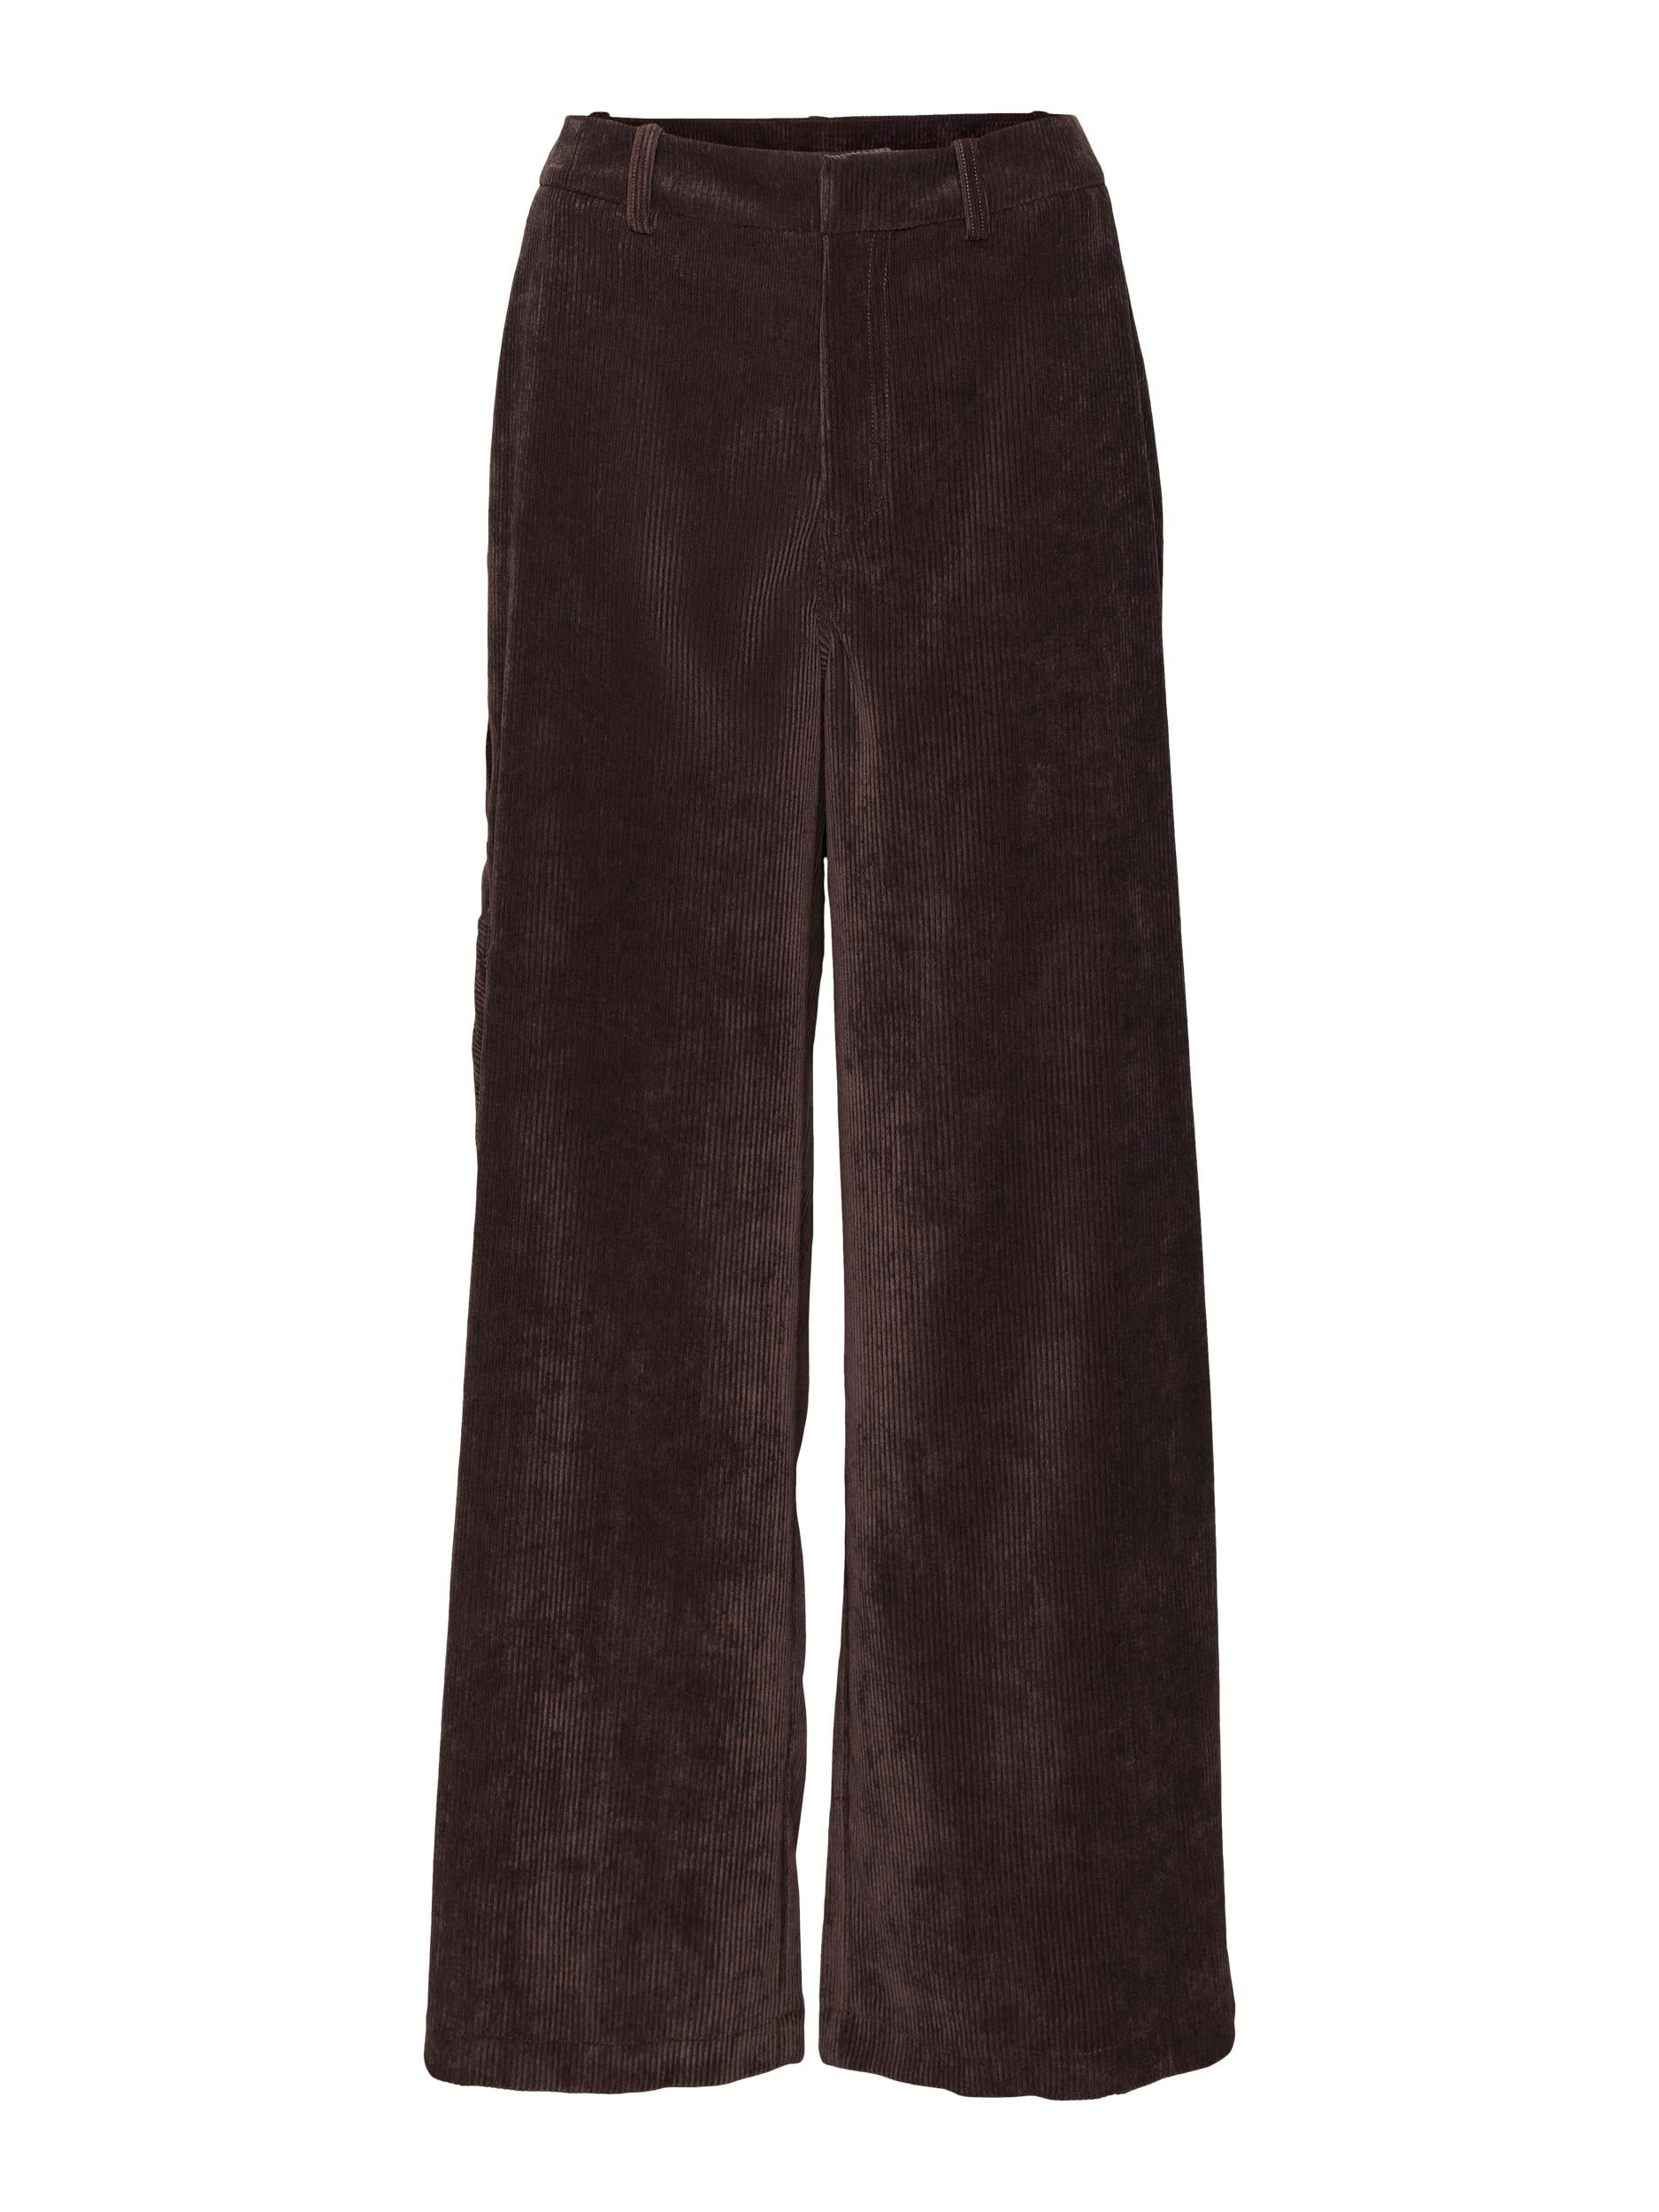 Something New brown corduroy cargo trousers